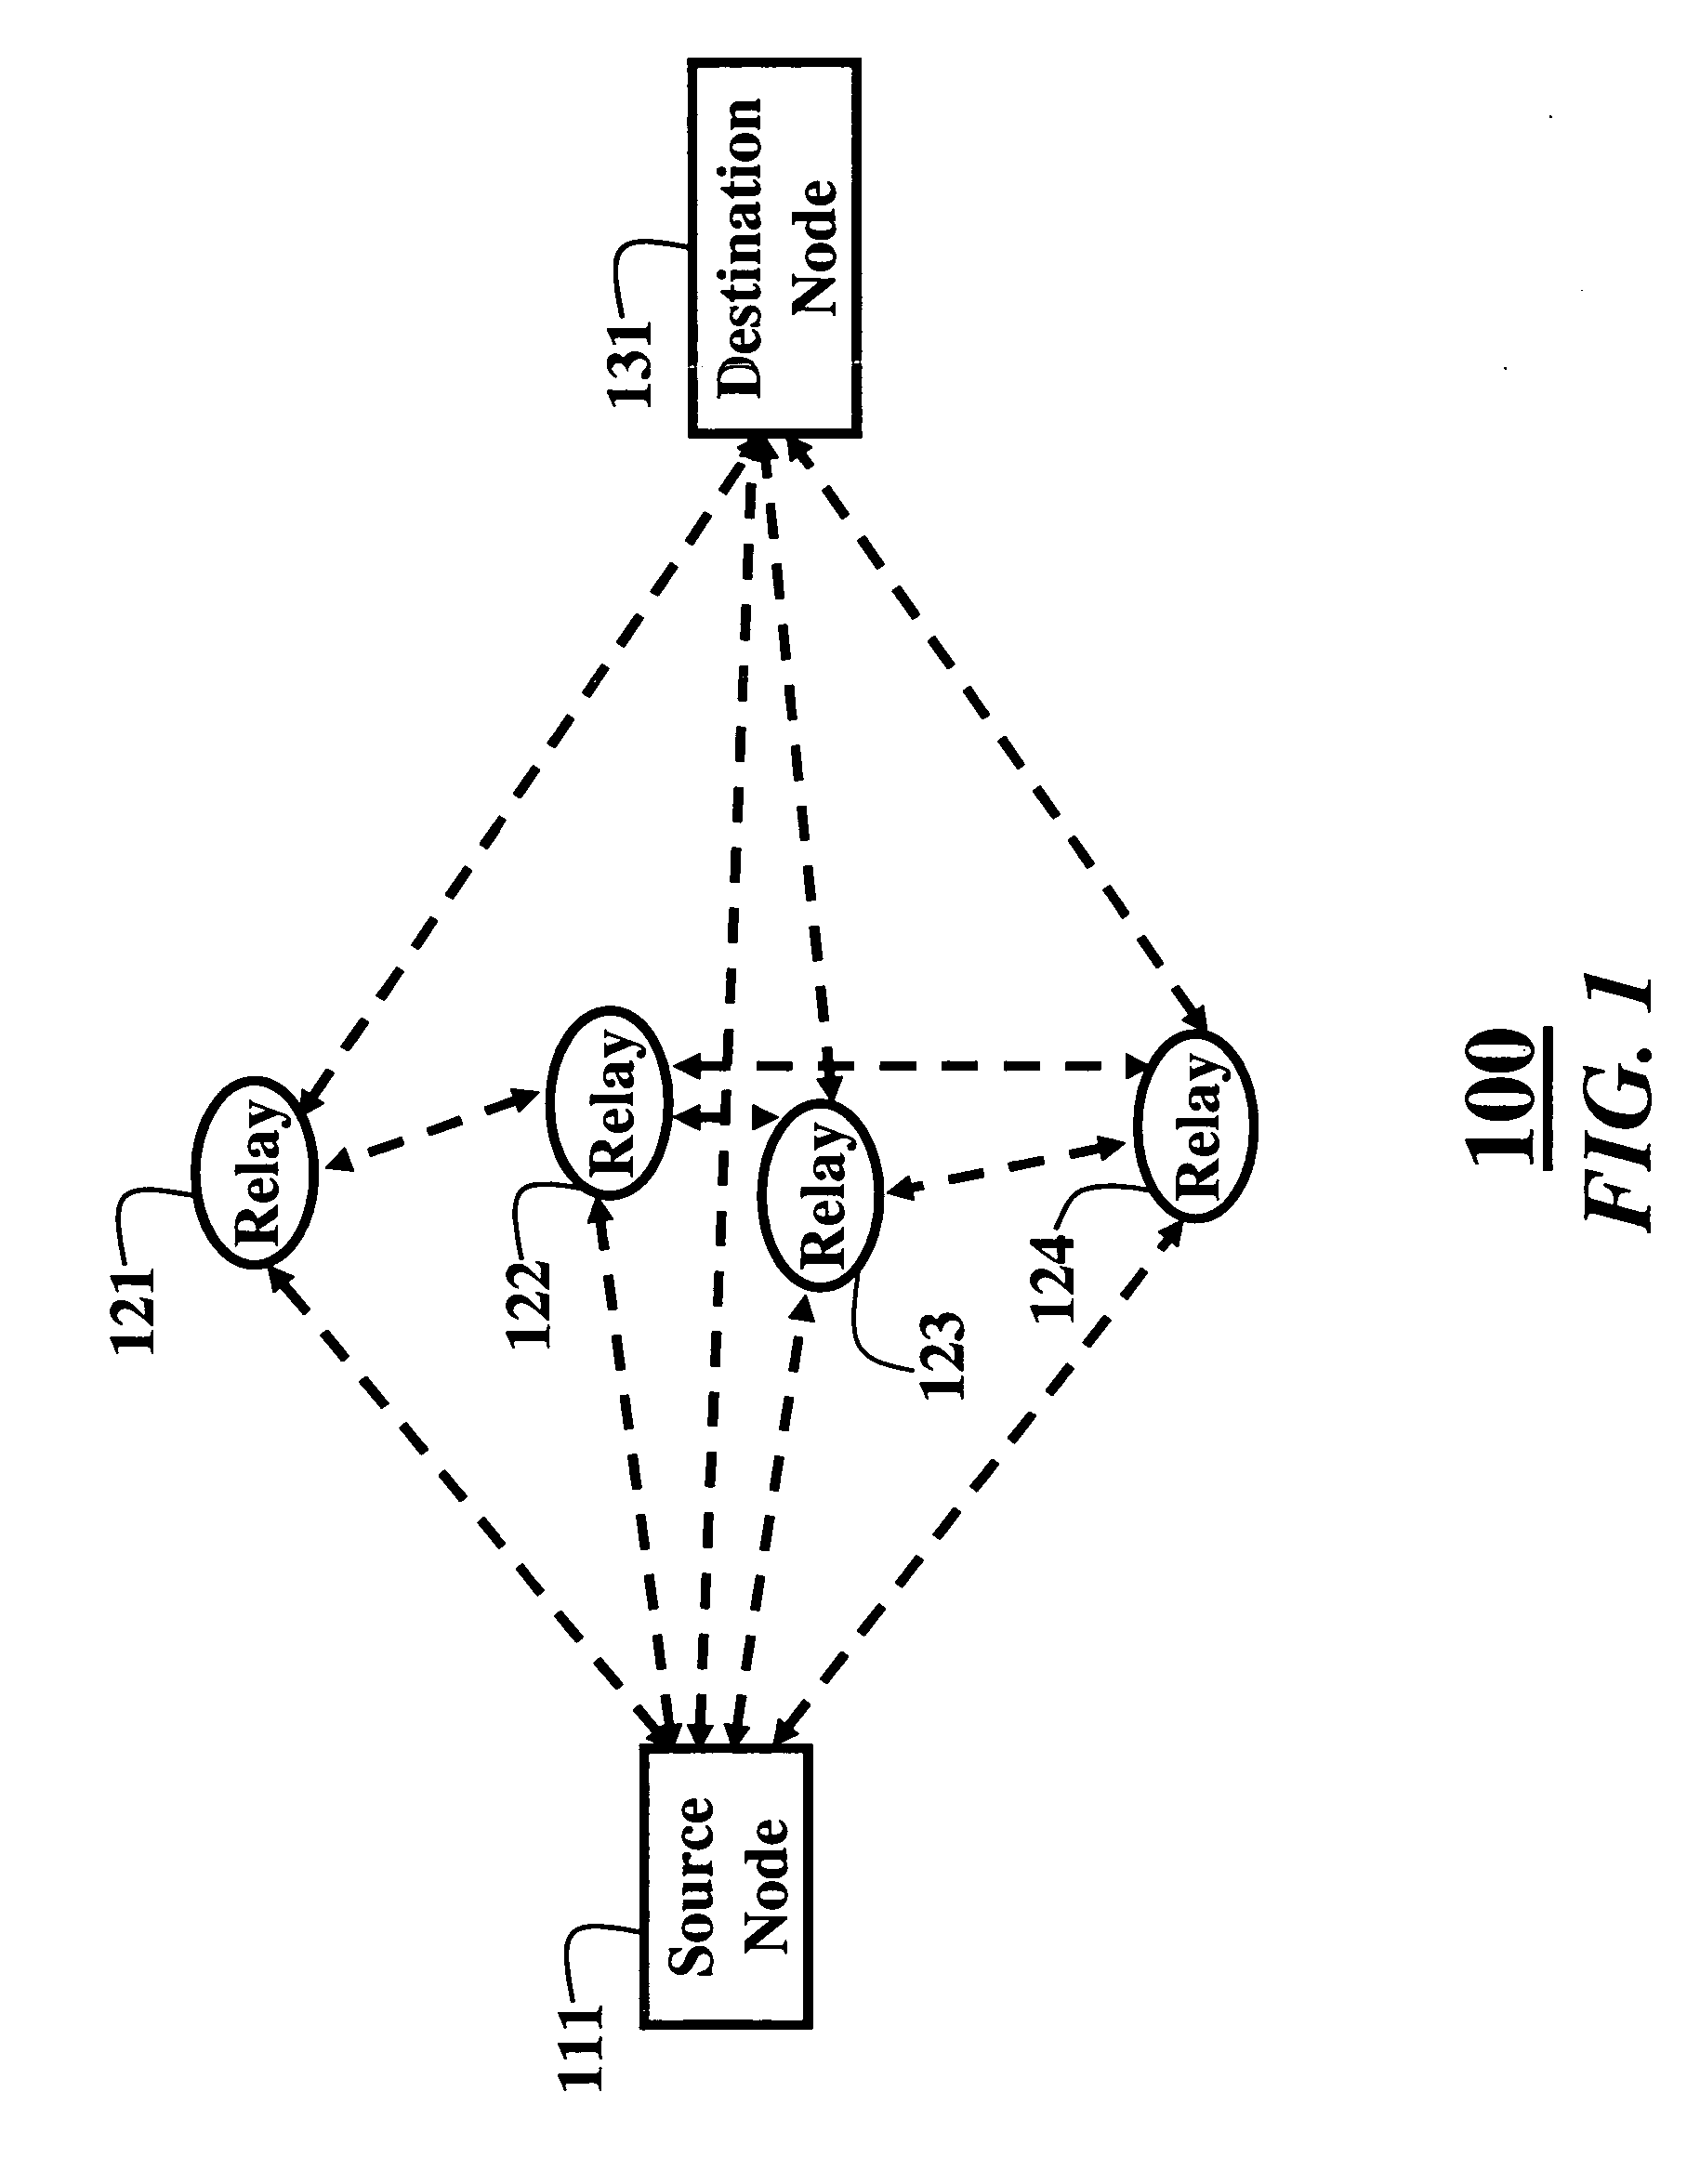 Cooperative relay networks using rateless codes